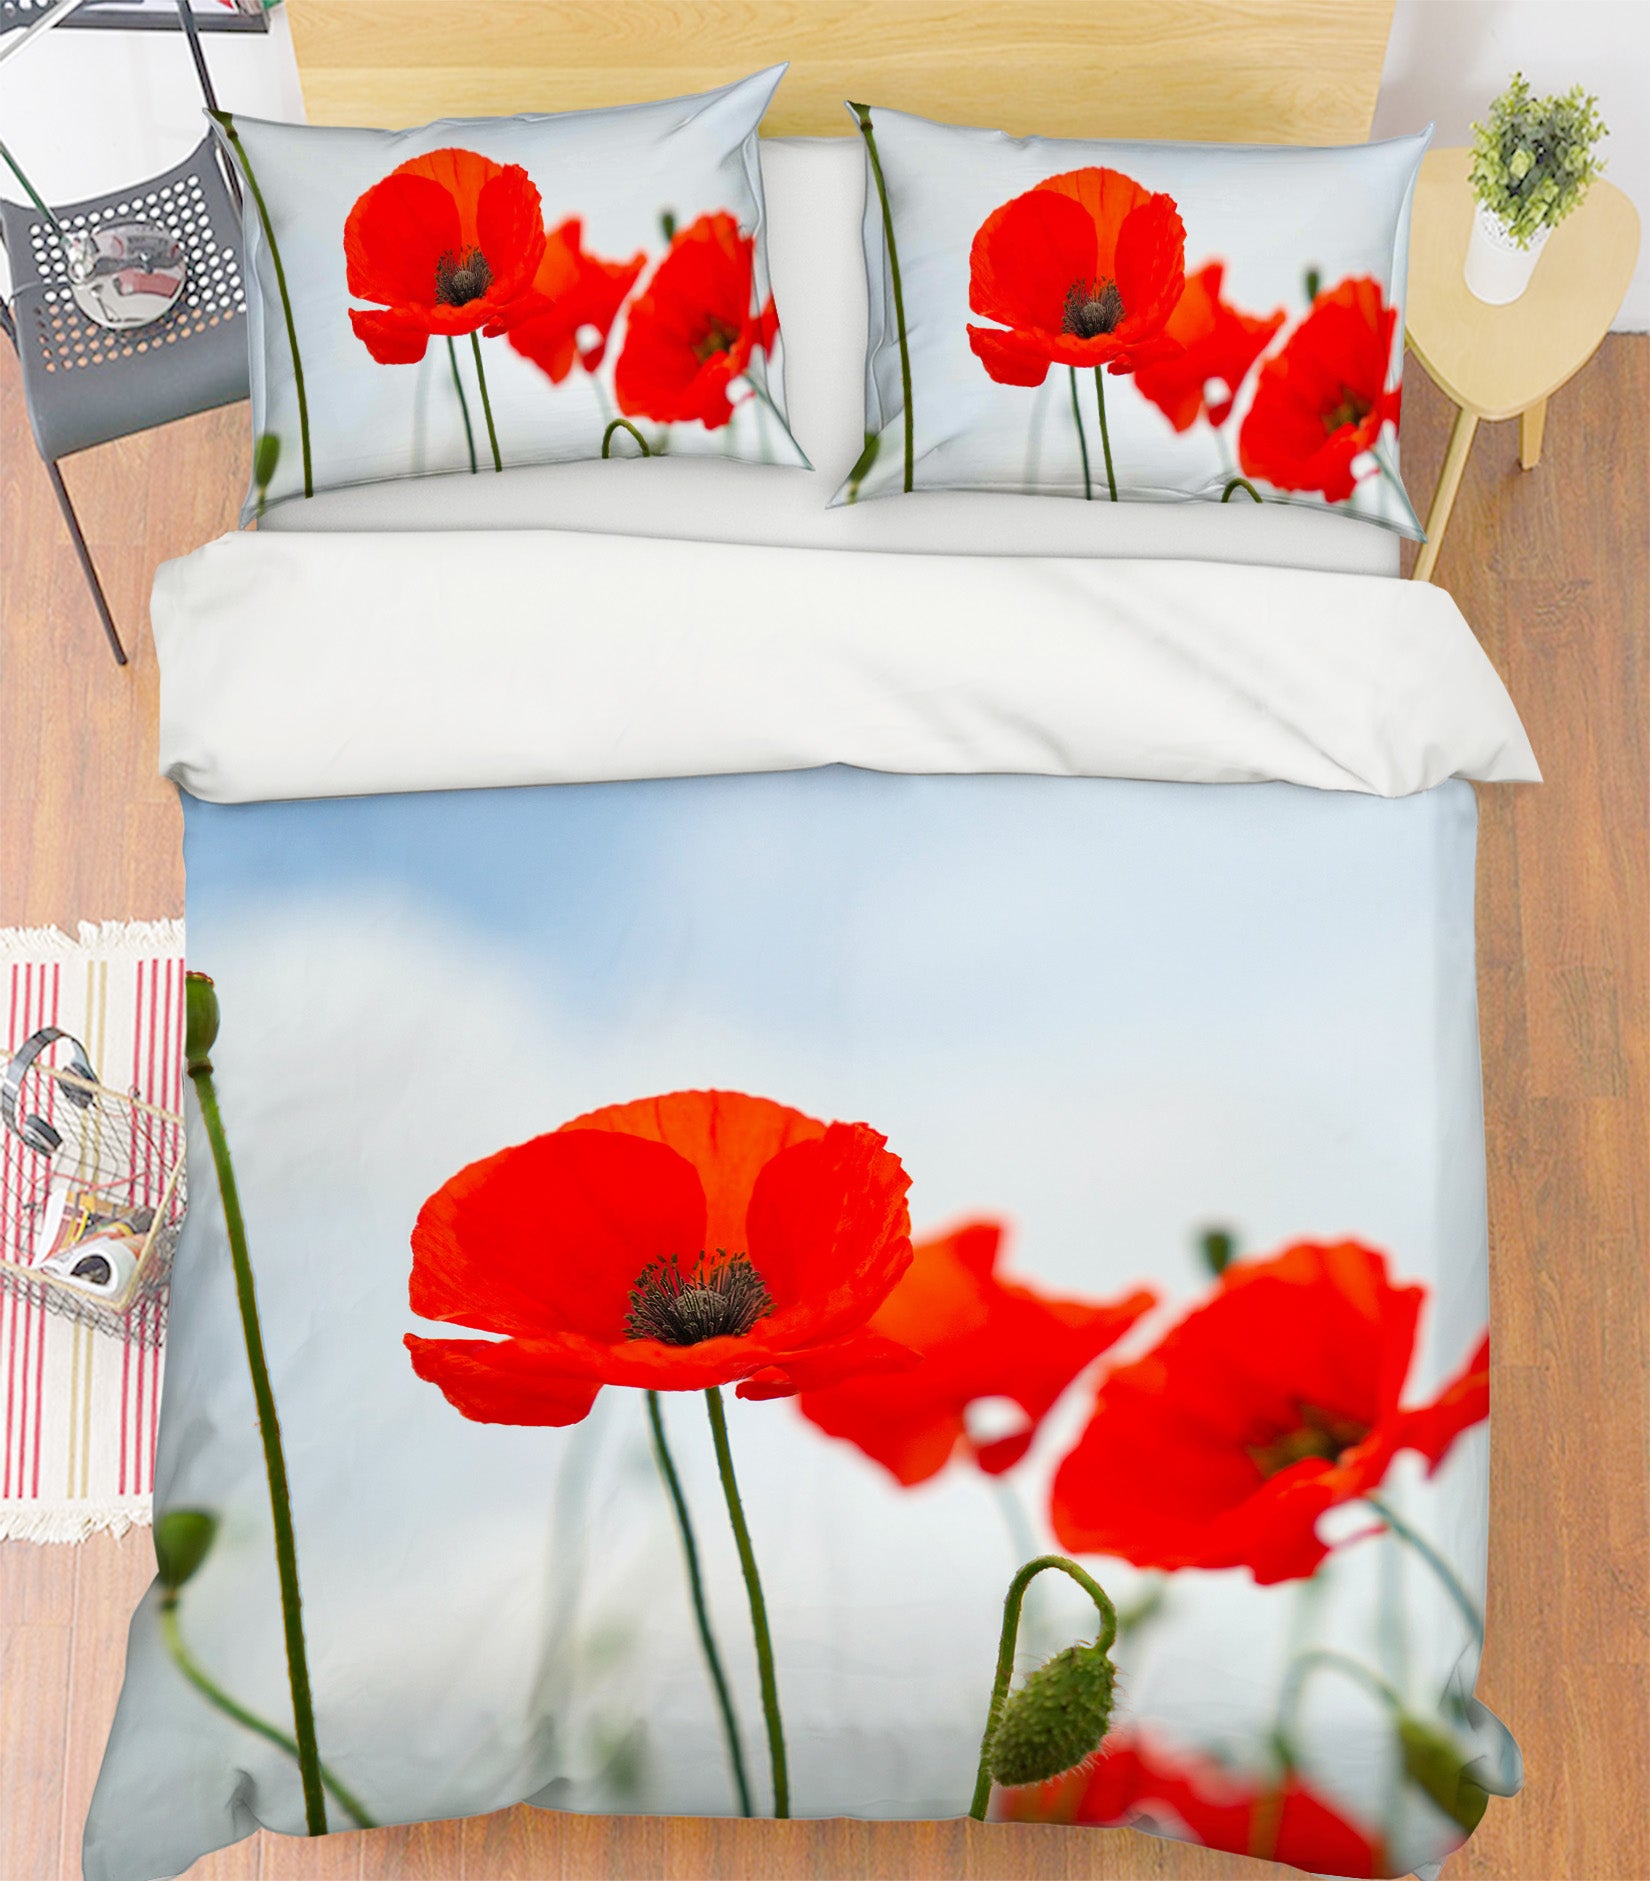 3D Red Flowers 2112 Marco Carmassi Bedding Bed Pillowcases Quilt